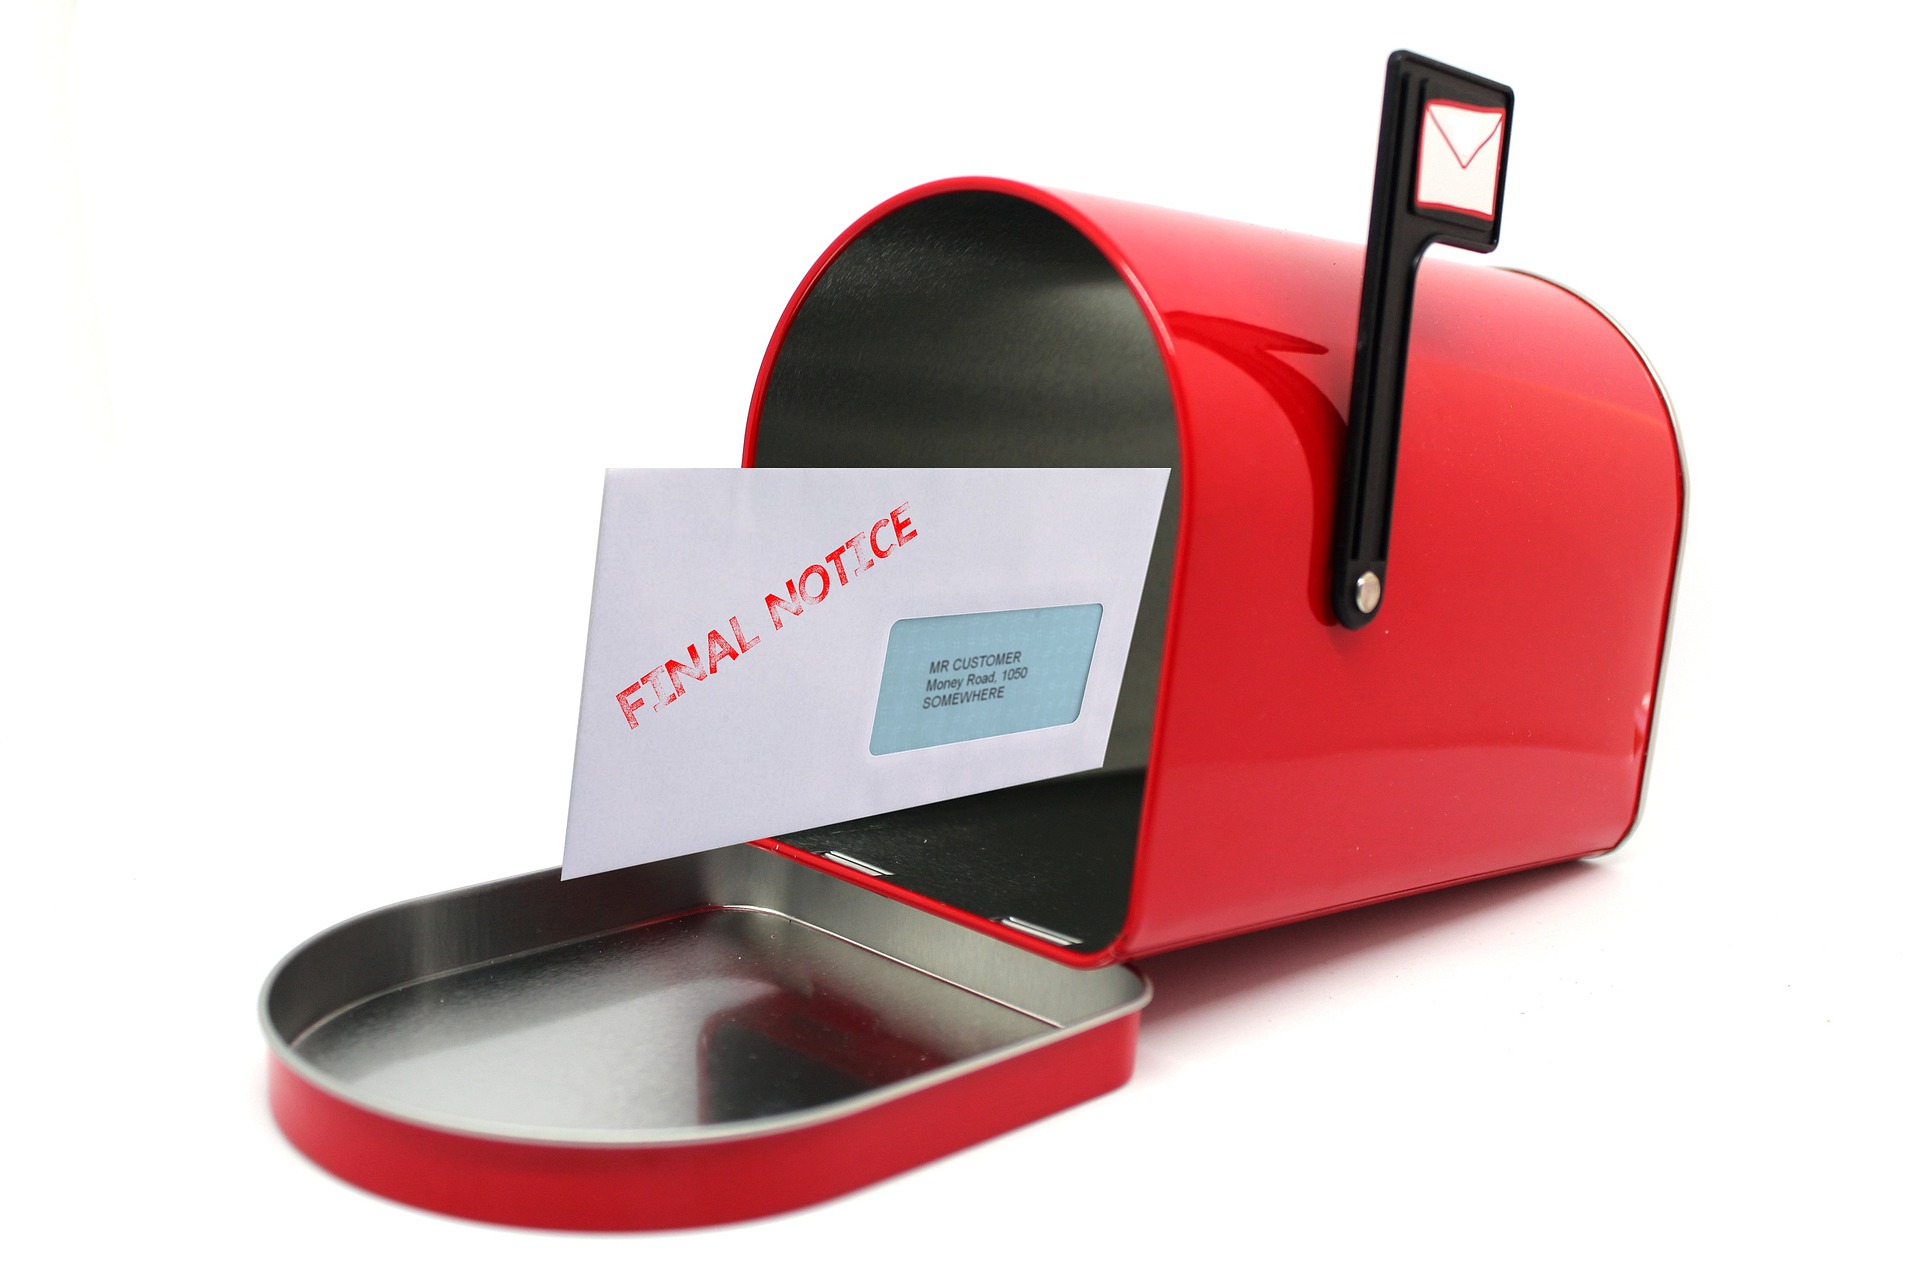 PHOTO: A final notice letter in a mailbox. Photo courtesy of Tumisu on pixabayphotos.com. SOURCE: https://pixabay.com/photos/final-notice-warning-debt-pay-4896425/